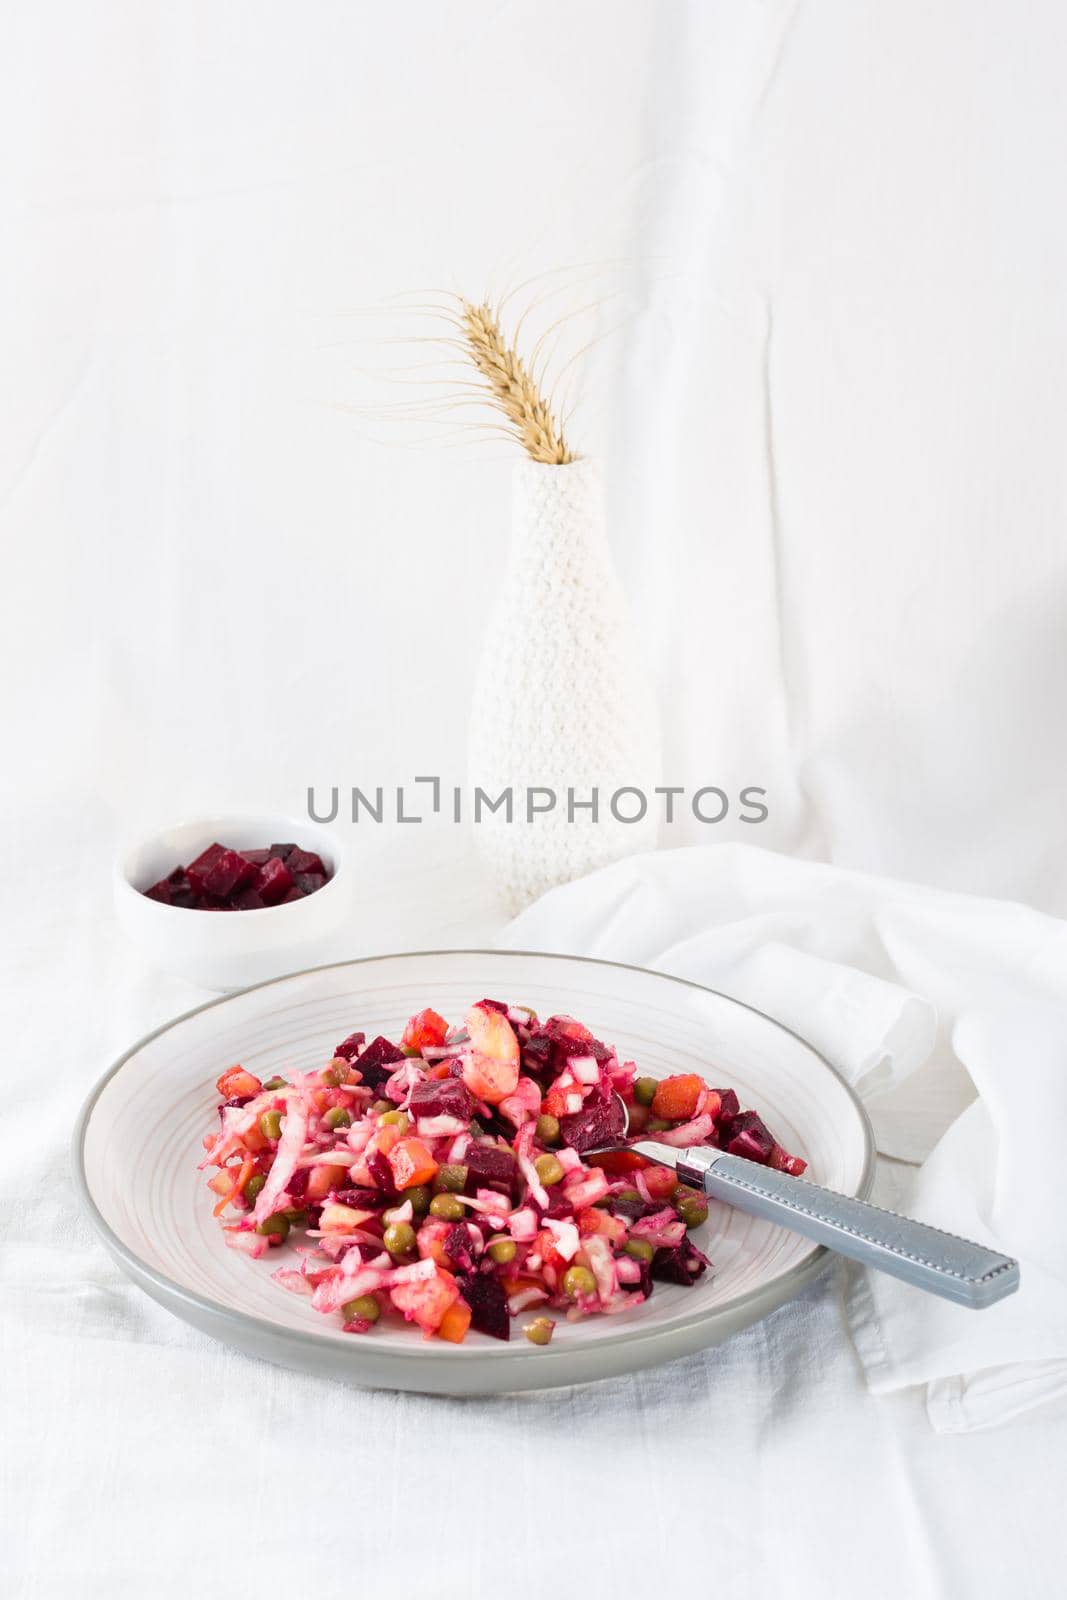 Russian traditional salad with vegetables - vinaigrette and spoon  on a plate and a bowl of beets on a table on a cloth. Vertical view by Aleruana